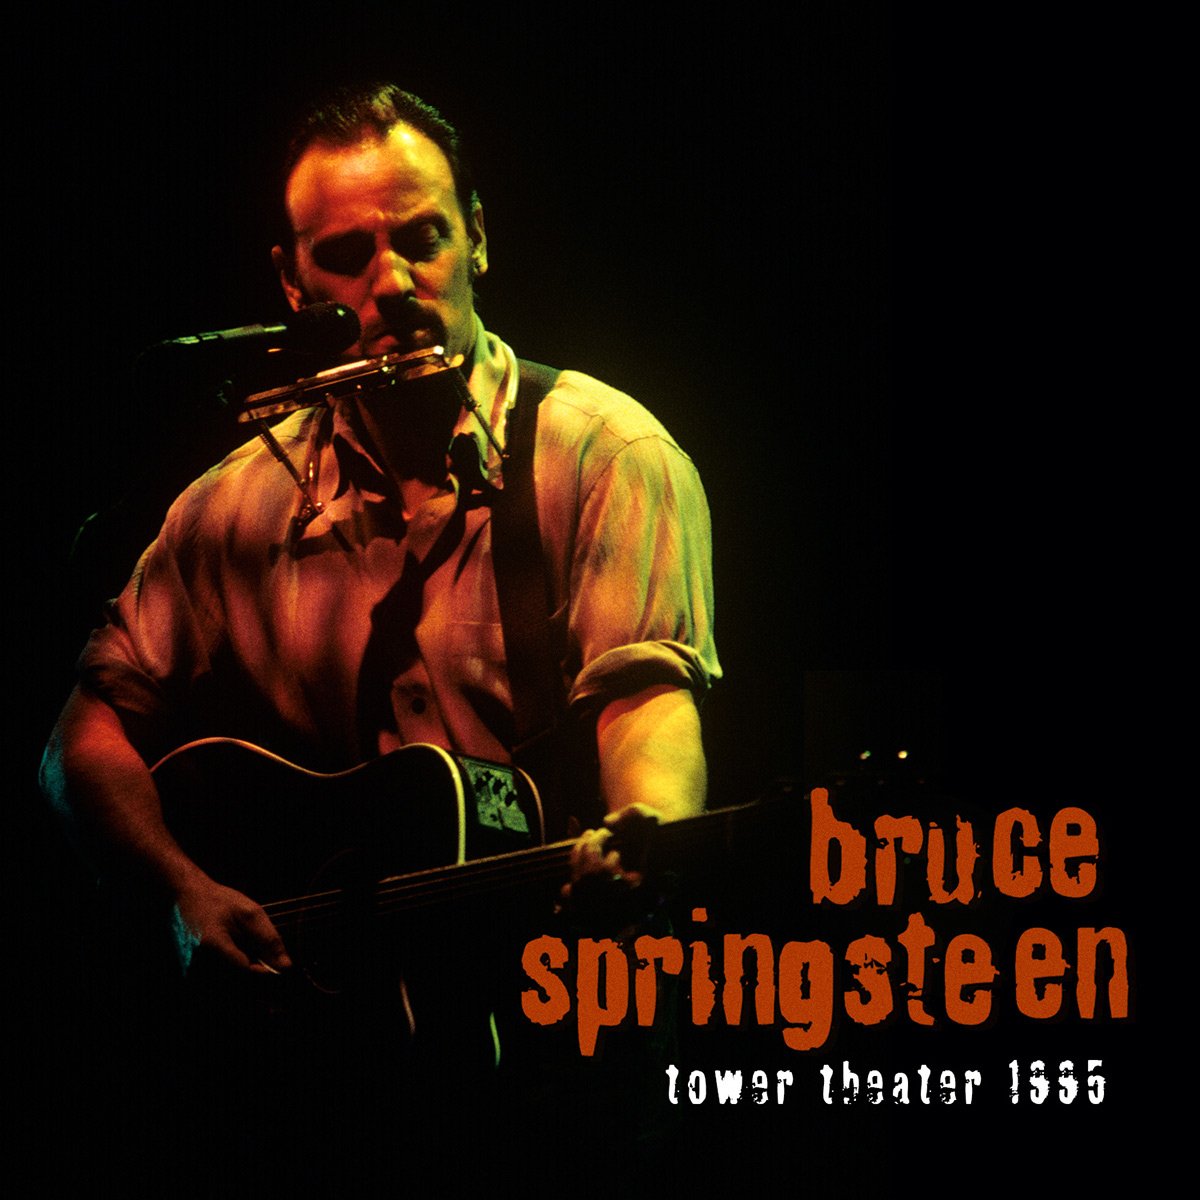 Bruce Springsteen – 12-09-95 – Tower Theater, Upper Darby, PA (2022) [Official Digital Download 24bit/44,1kHz]